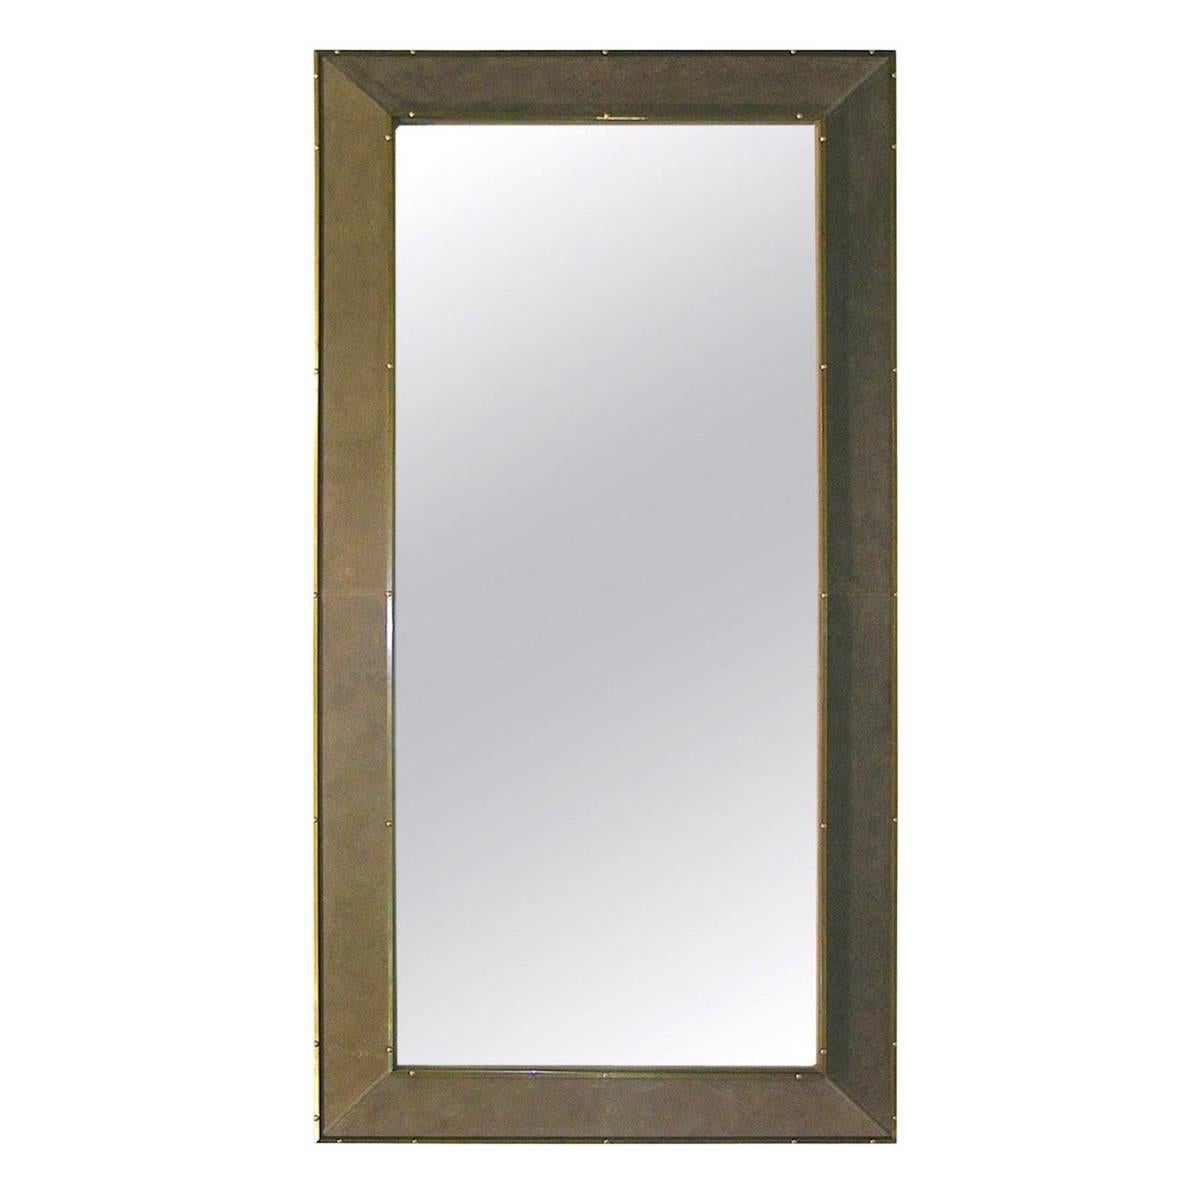 1970s Italian Suede Leather Floor Mirror with Modern Bronze Accents